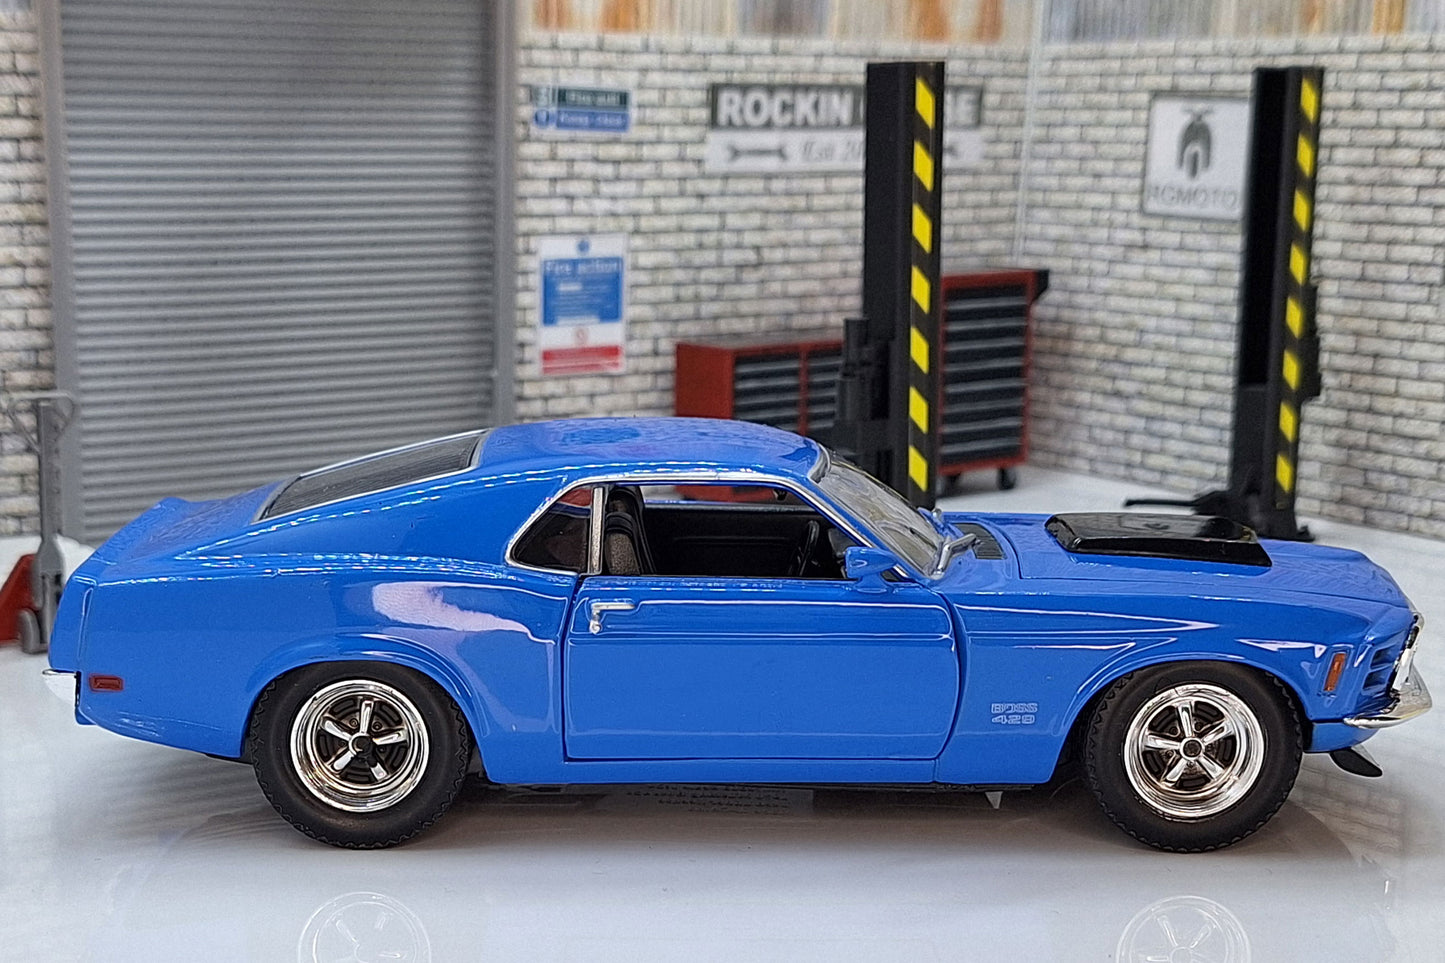 Ford Mustang Boss 429, Blue, 1970 1:24 Scale Car